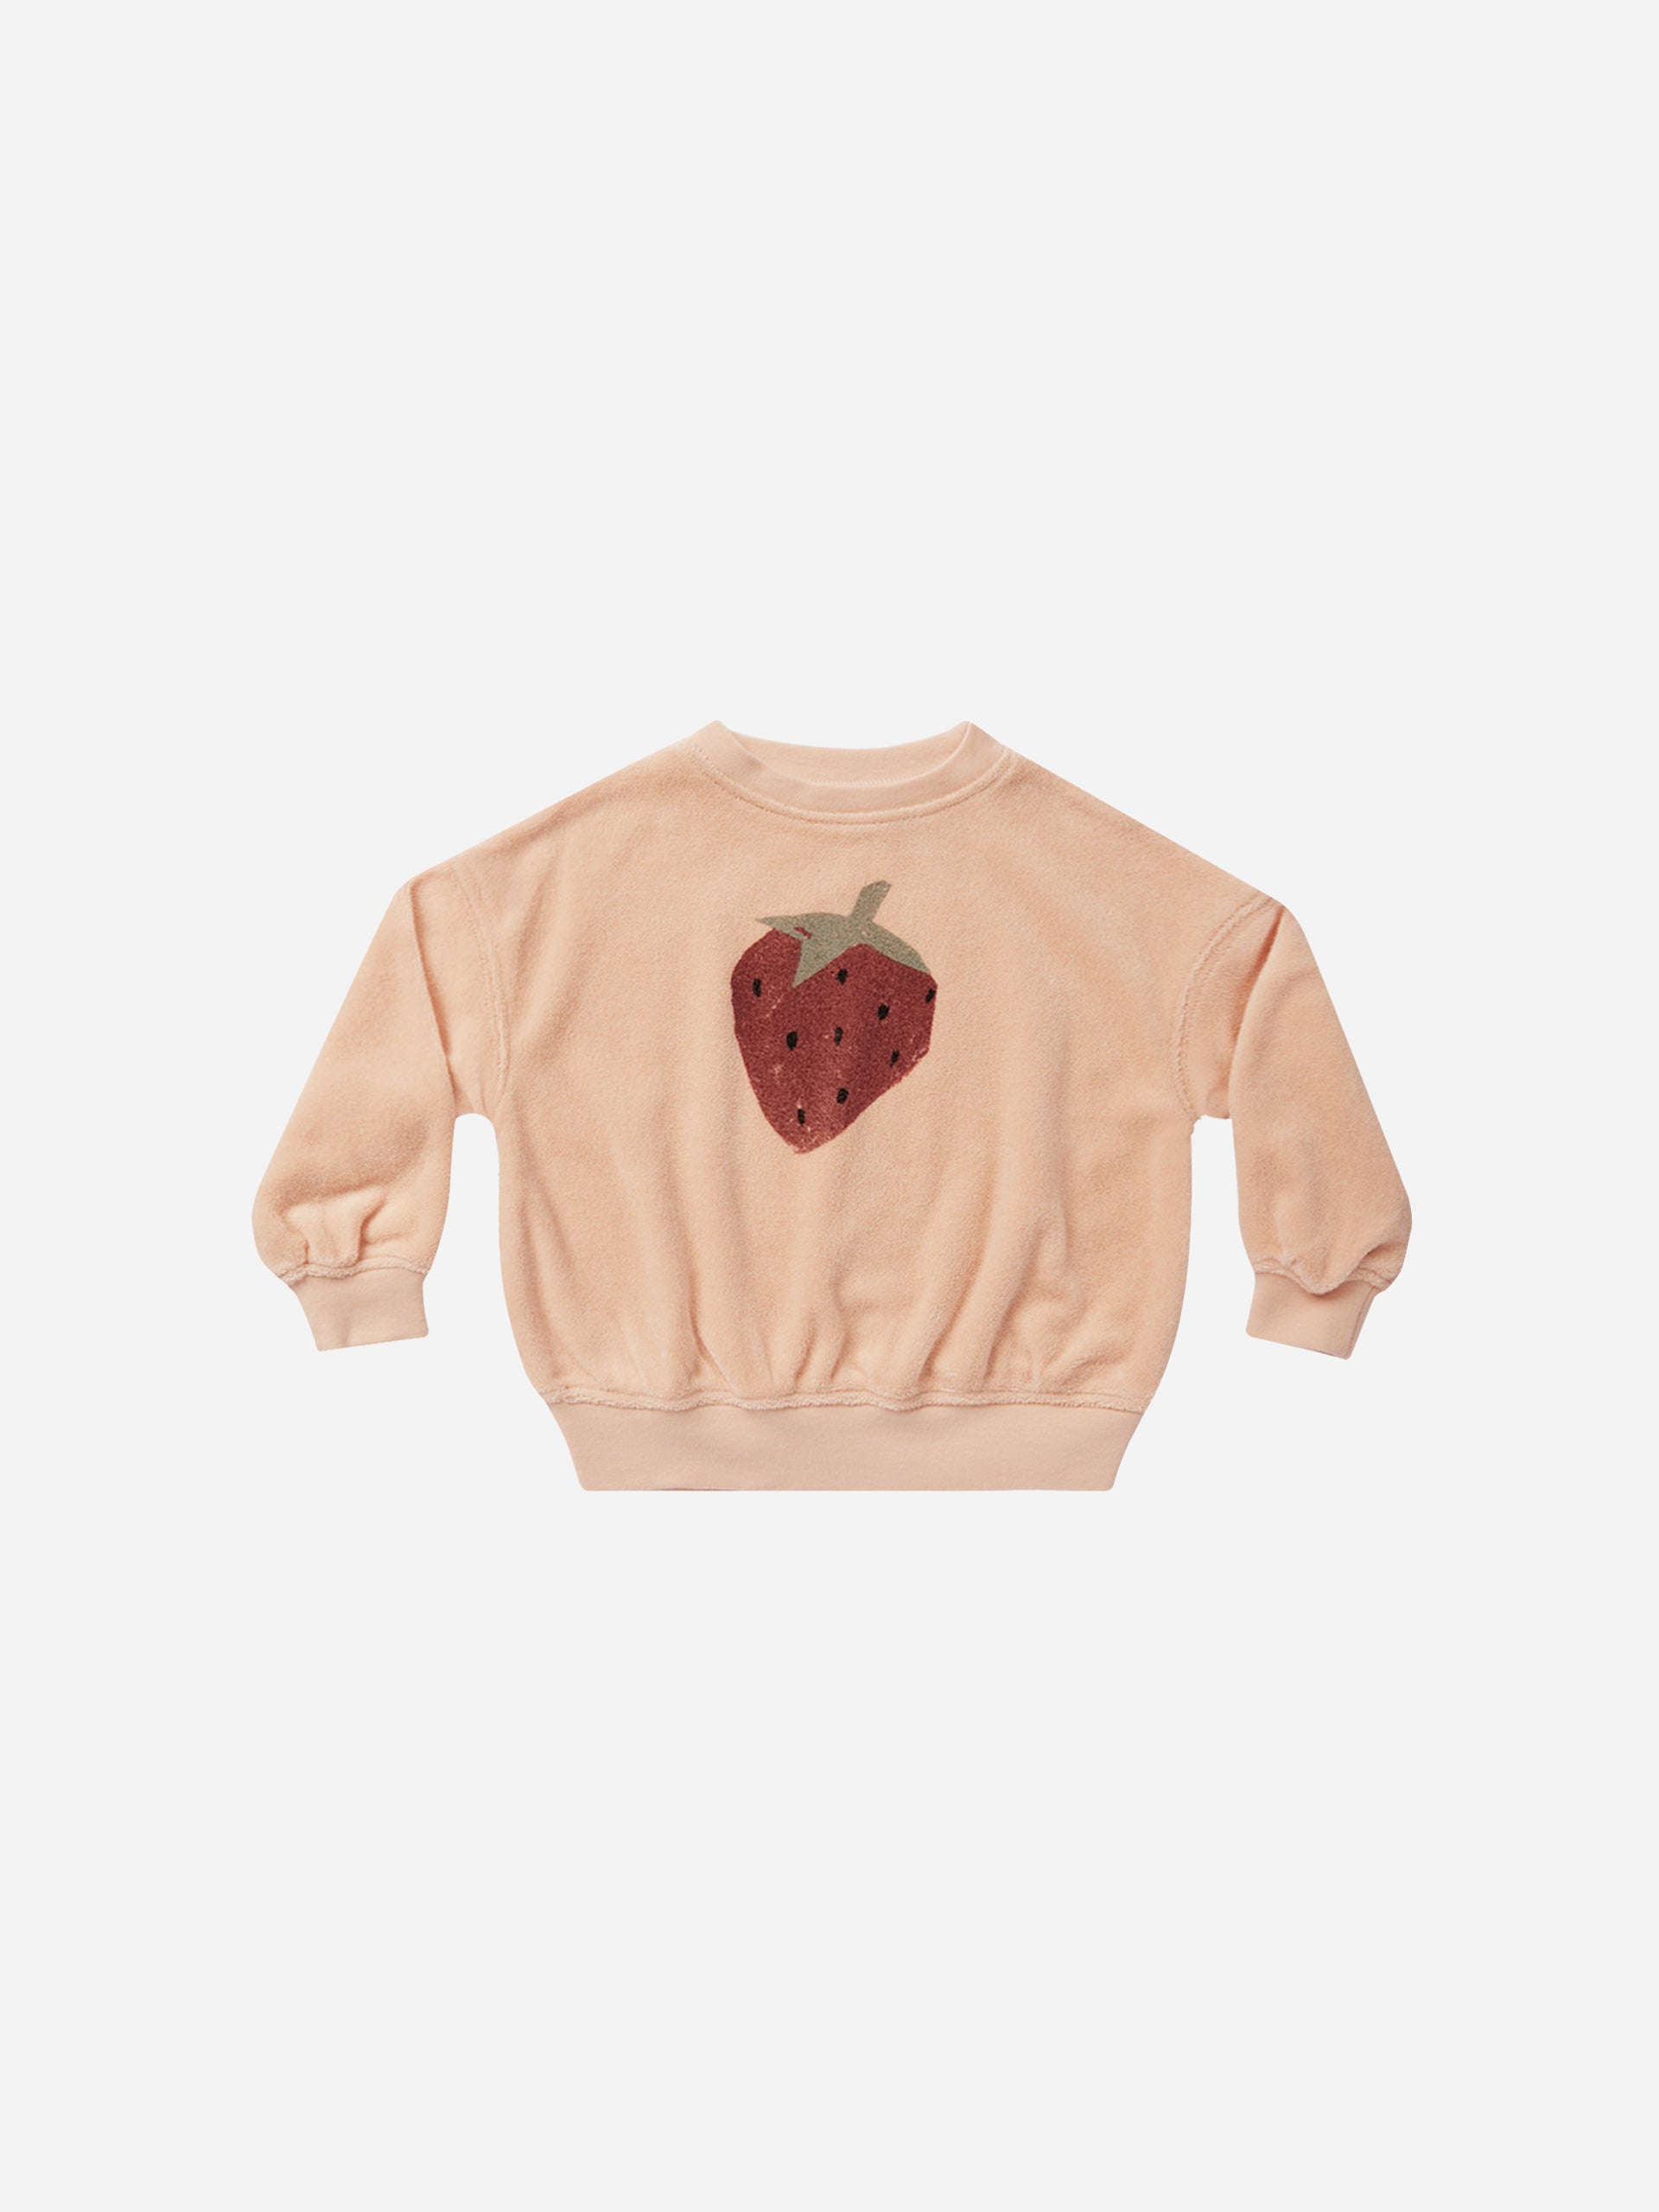 Sweatshirt || Strawberry - Rylee + Cru | Kids Clothes | Trendy Baby Clothes | Modern Infant Outfits |